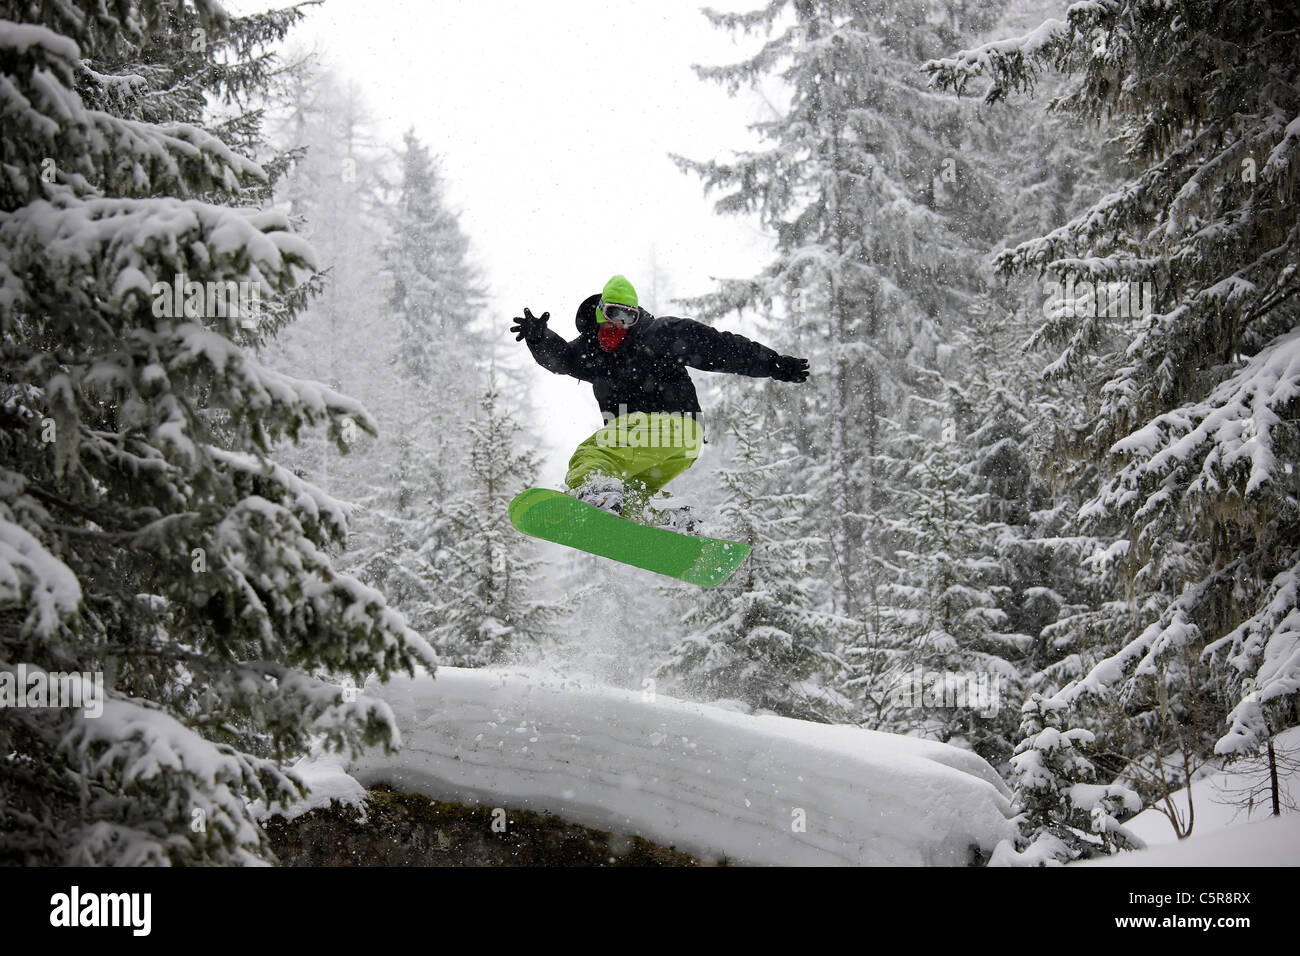 A snowboarder jumping through a snowy alpine forest. Stock Photo